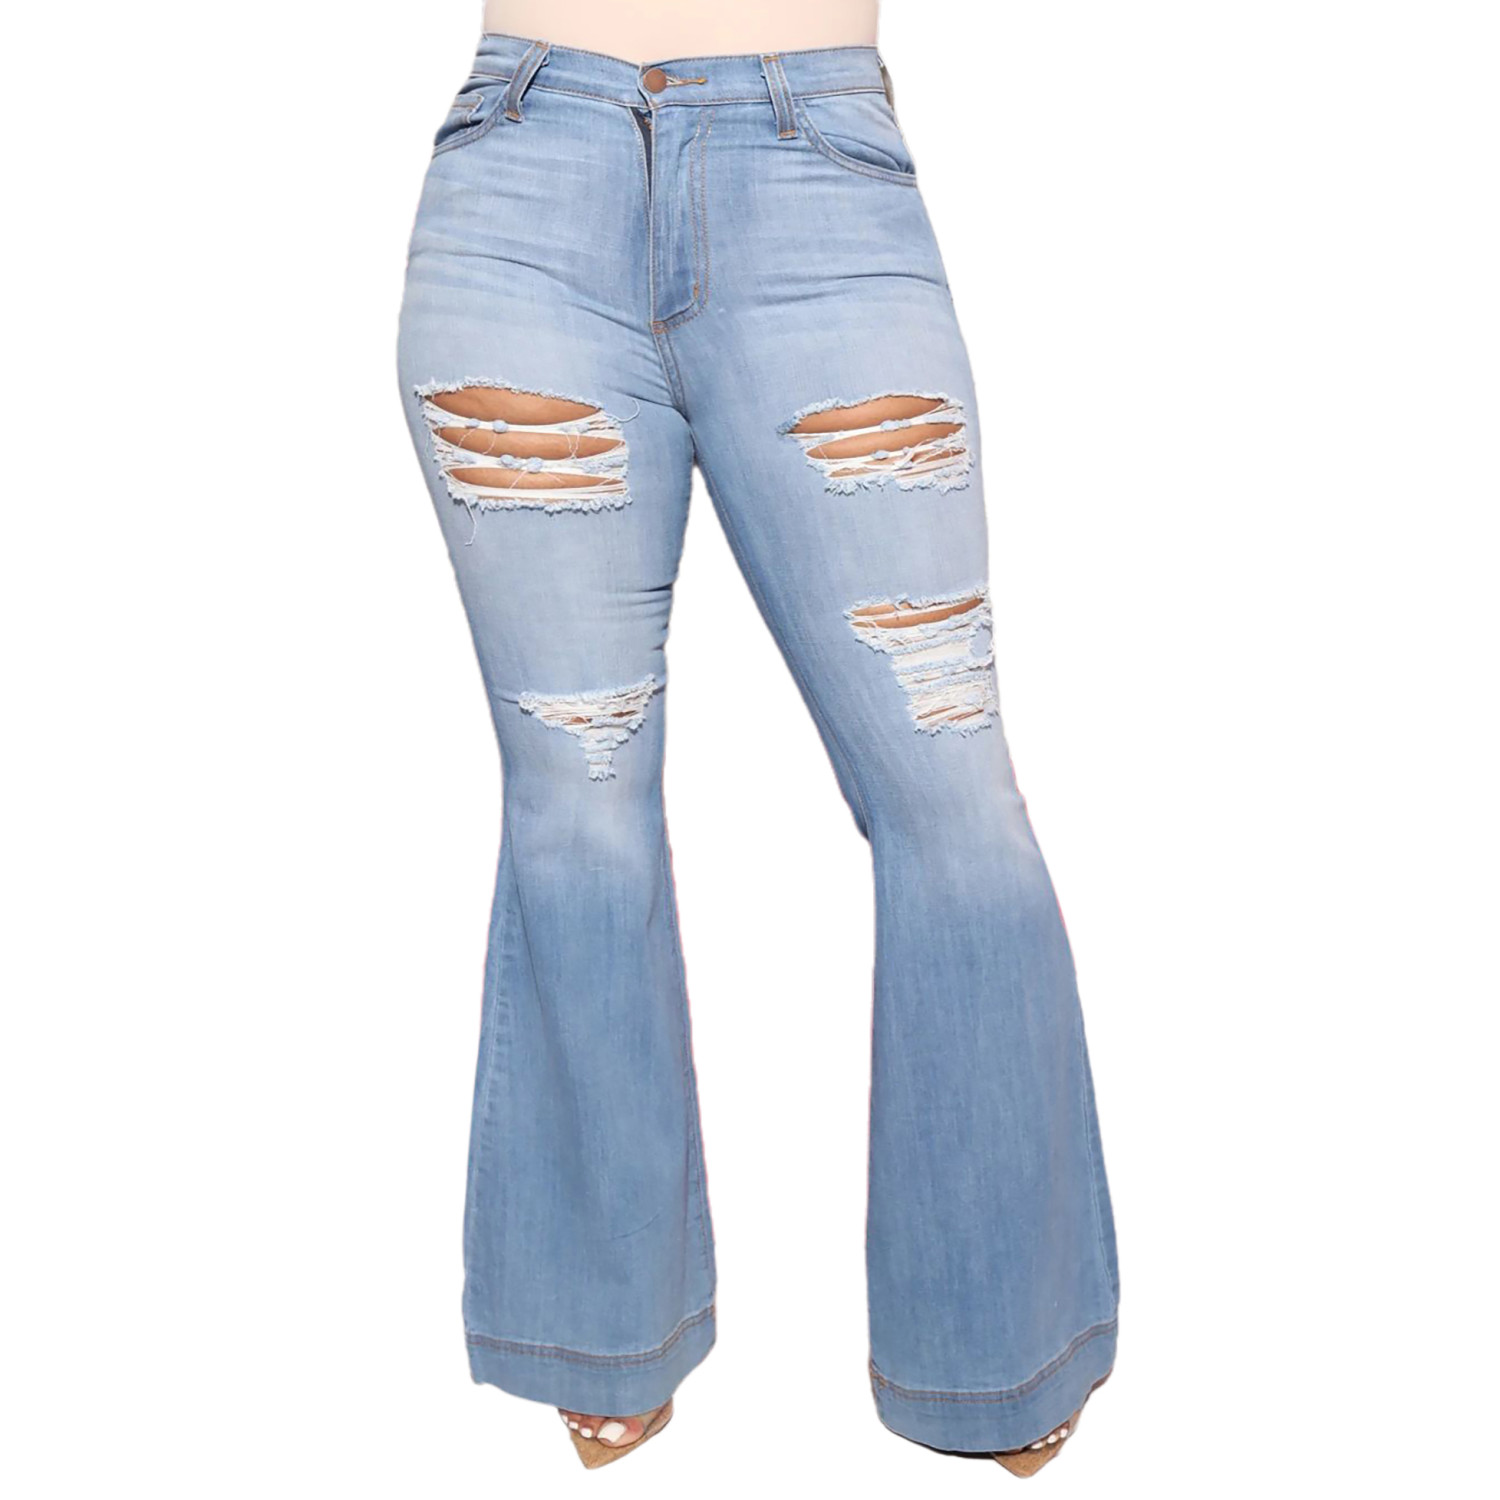 Plus Size High Waist Ripped Bell Bottom Jeans US$ 11.57 - www.lover ...